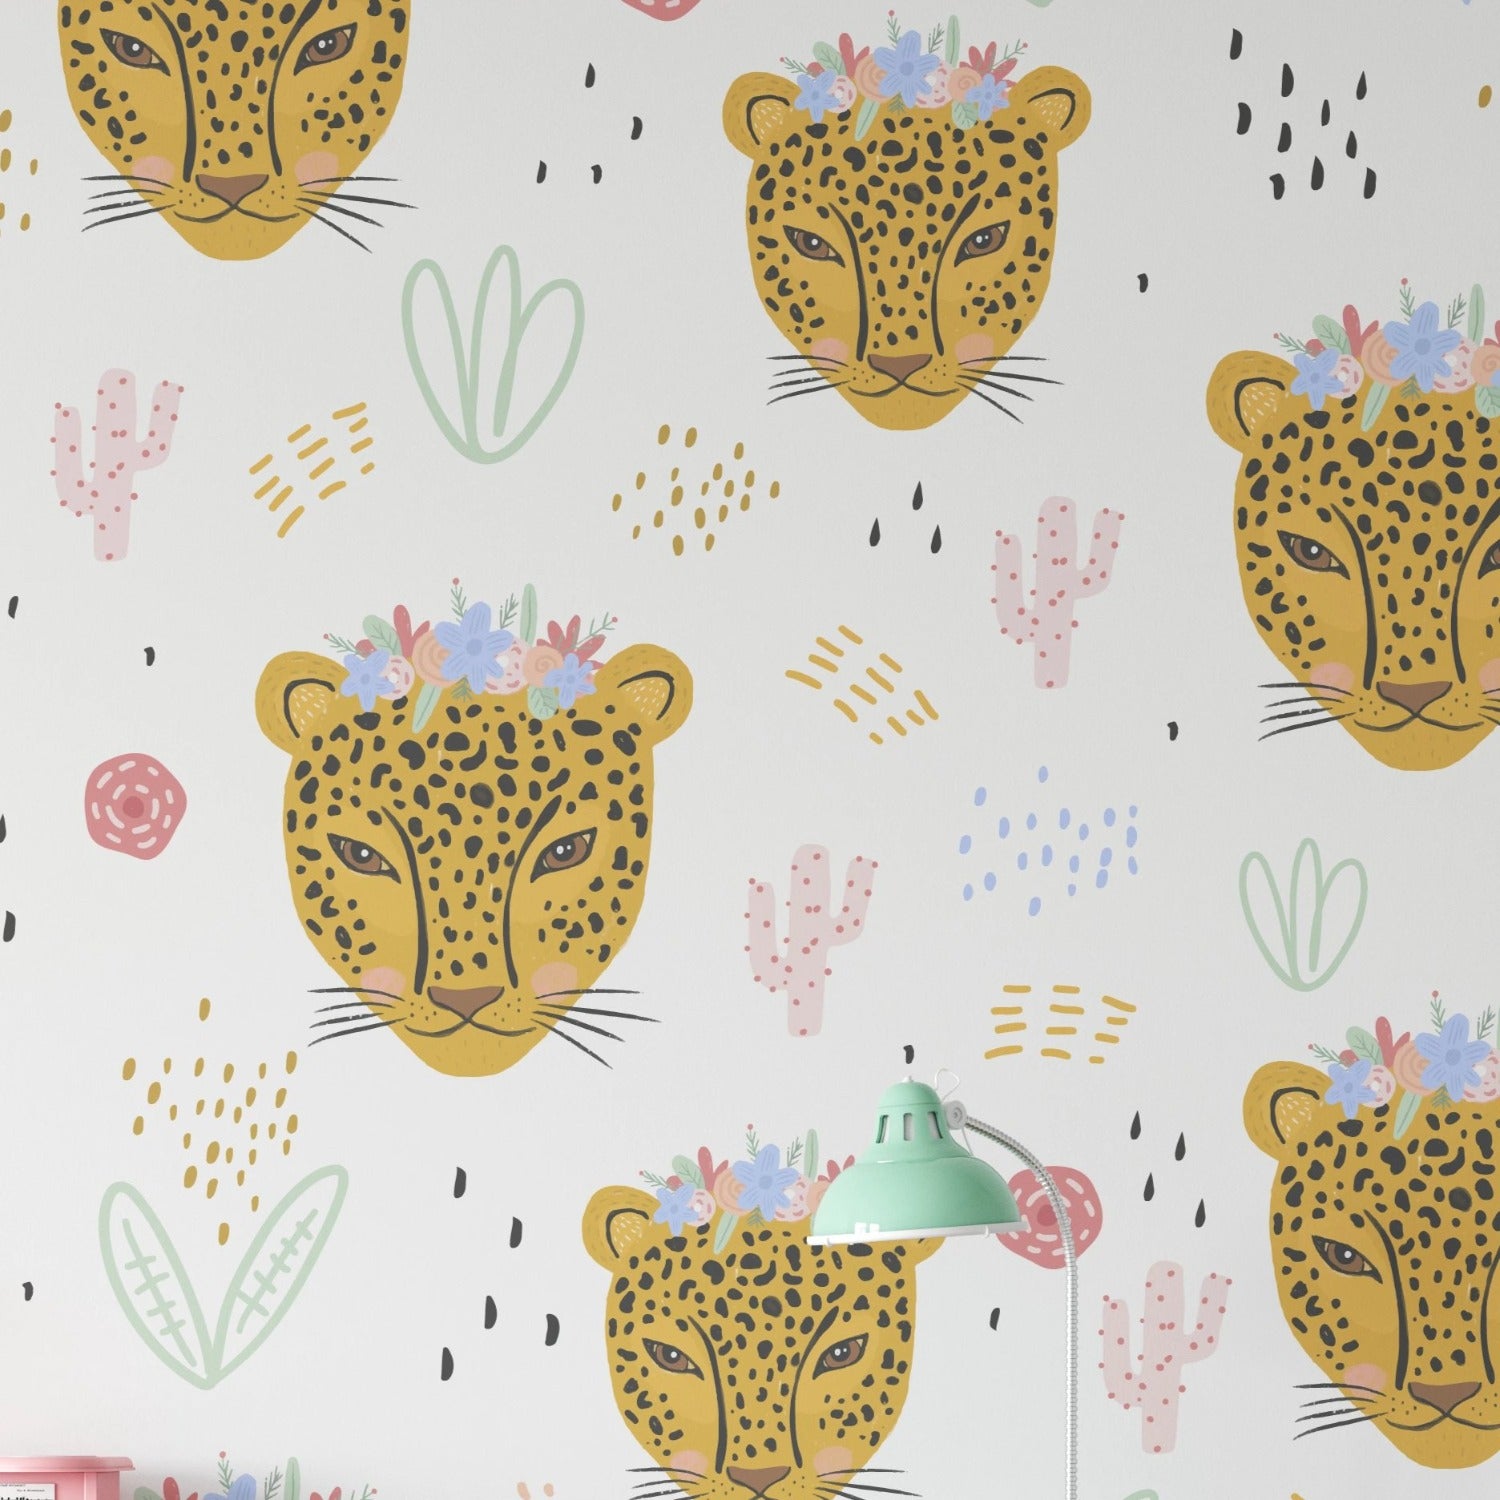 A children's wallpaper design featuring the heads of yellow leopards adorned with flower crowns on a white background. The pattern is interspersed with playful elements like pink cacti, green abstract shapes, and various colorful doodles.